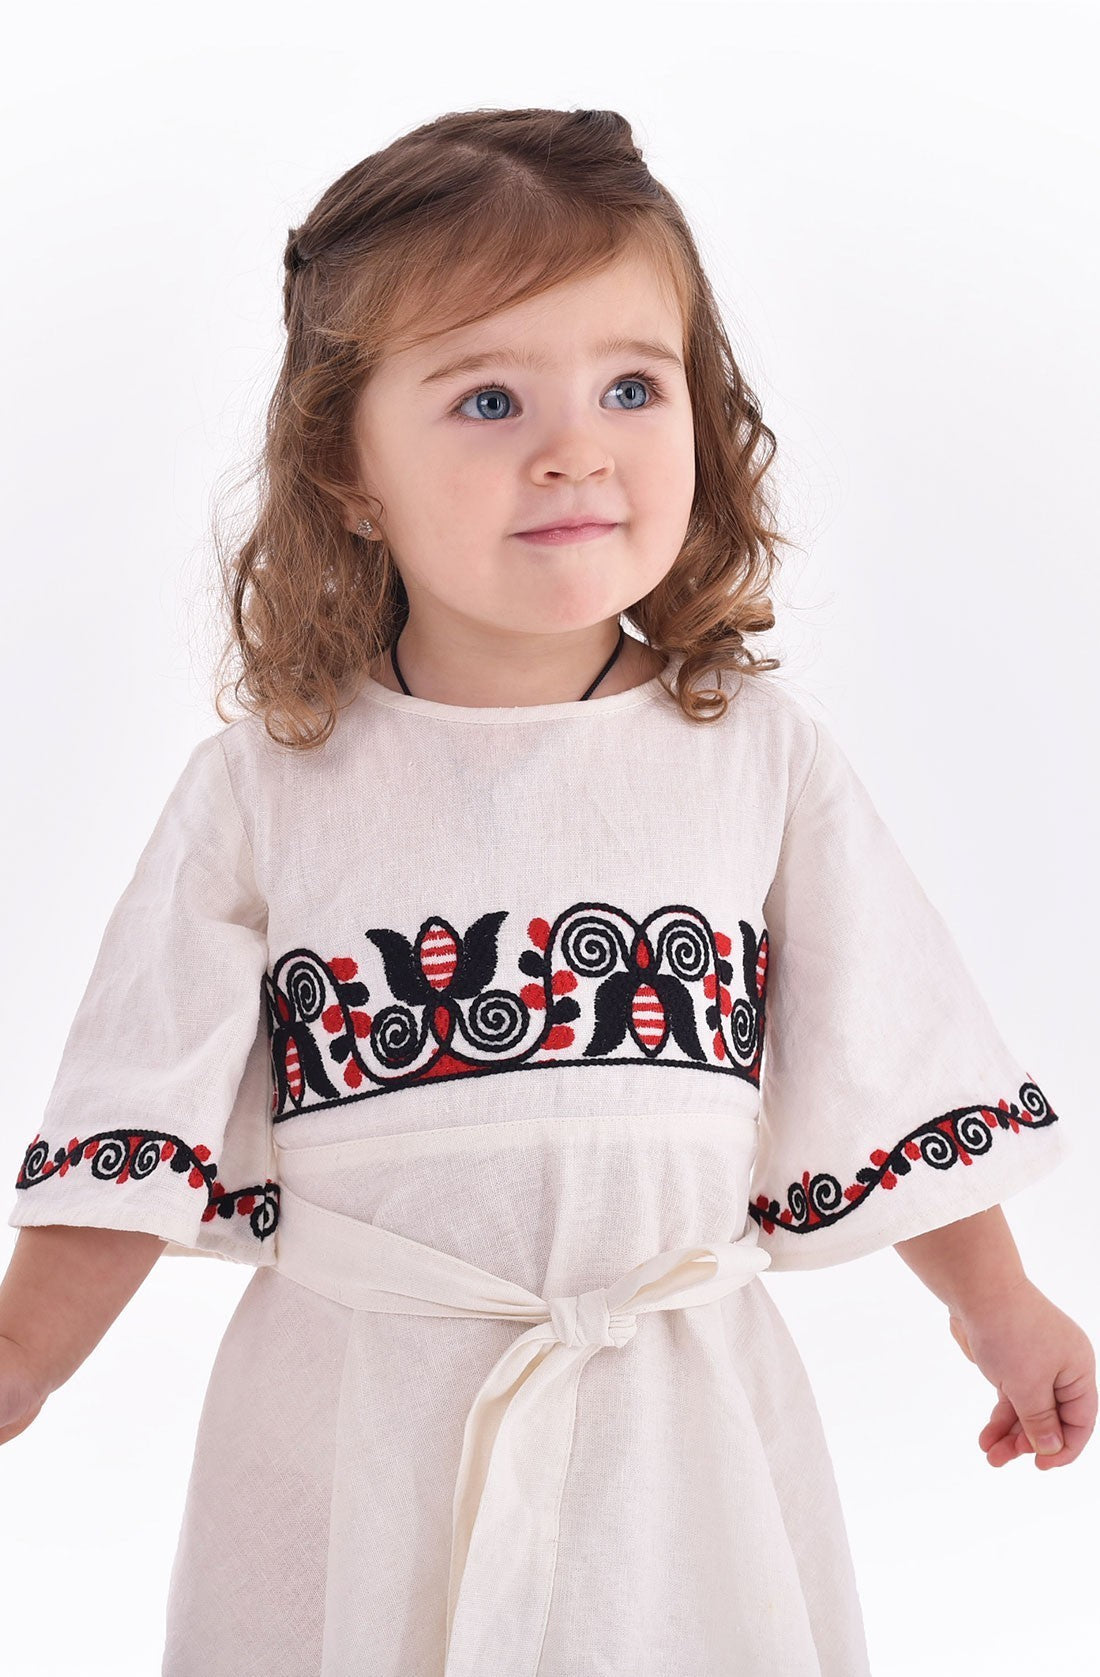 2KOLYORY Stylish Mother-Daughter Embroidery Dresses: Bereginia Collection - Ornament Store